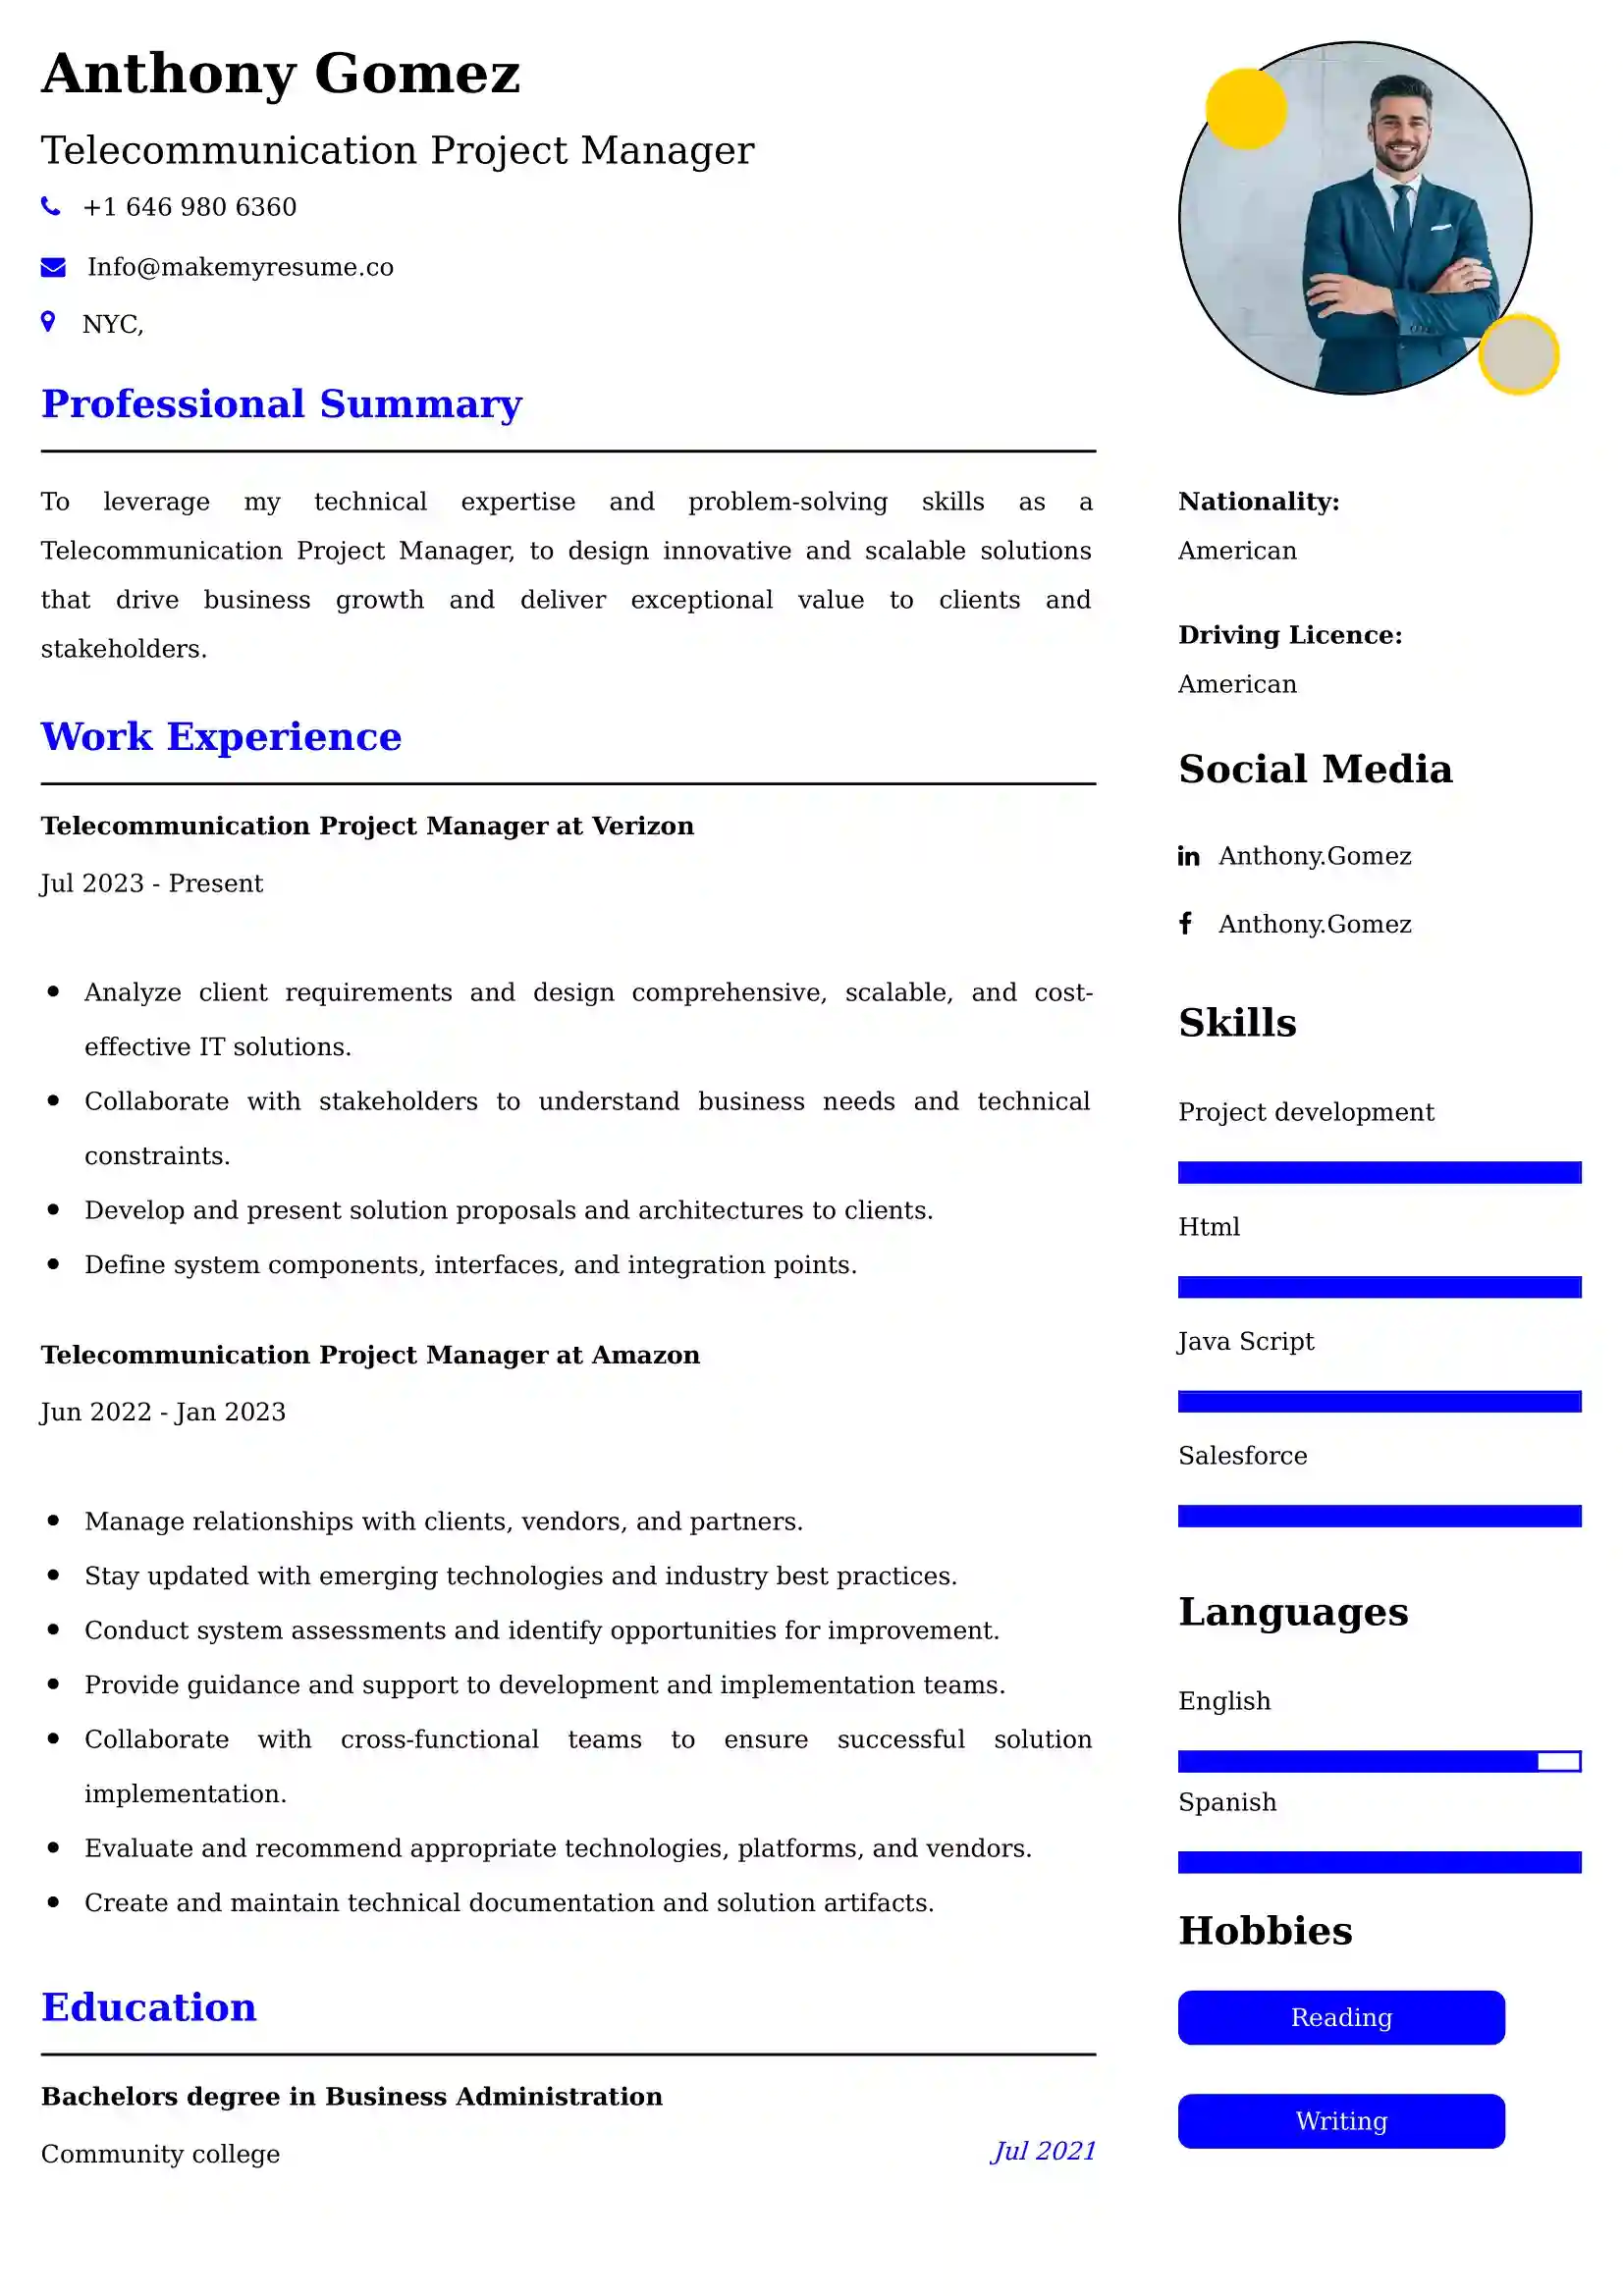 Telecommunication Project Manager Resume Examples - Australian Format and Tips